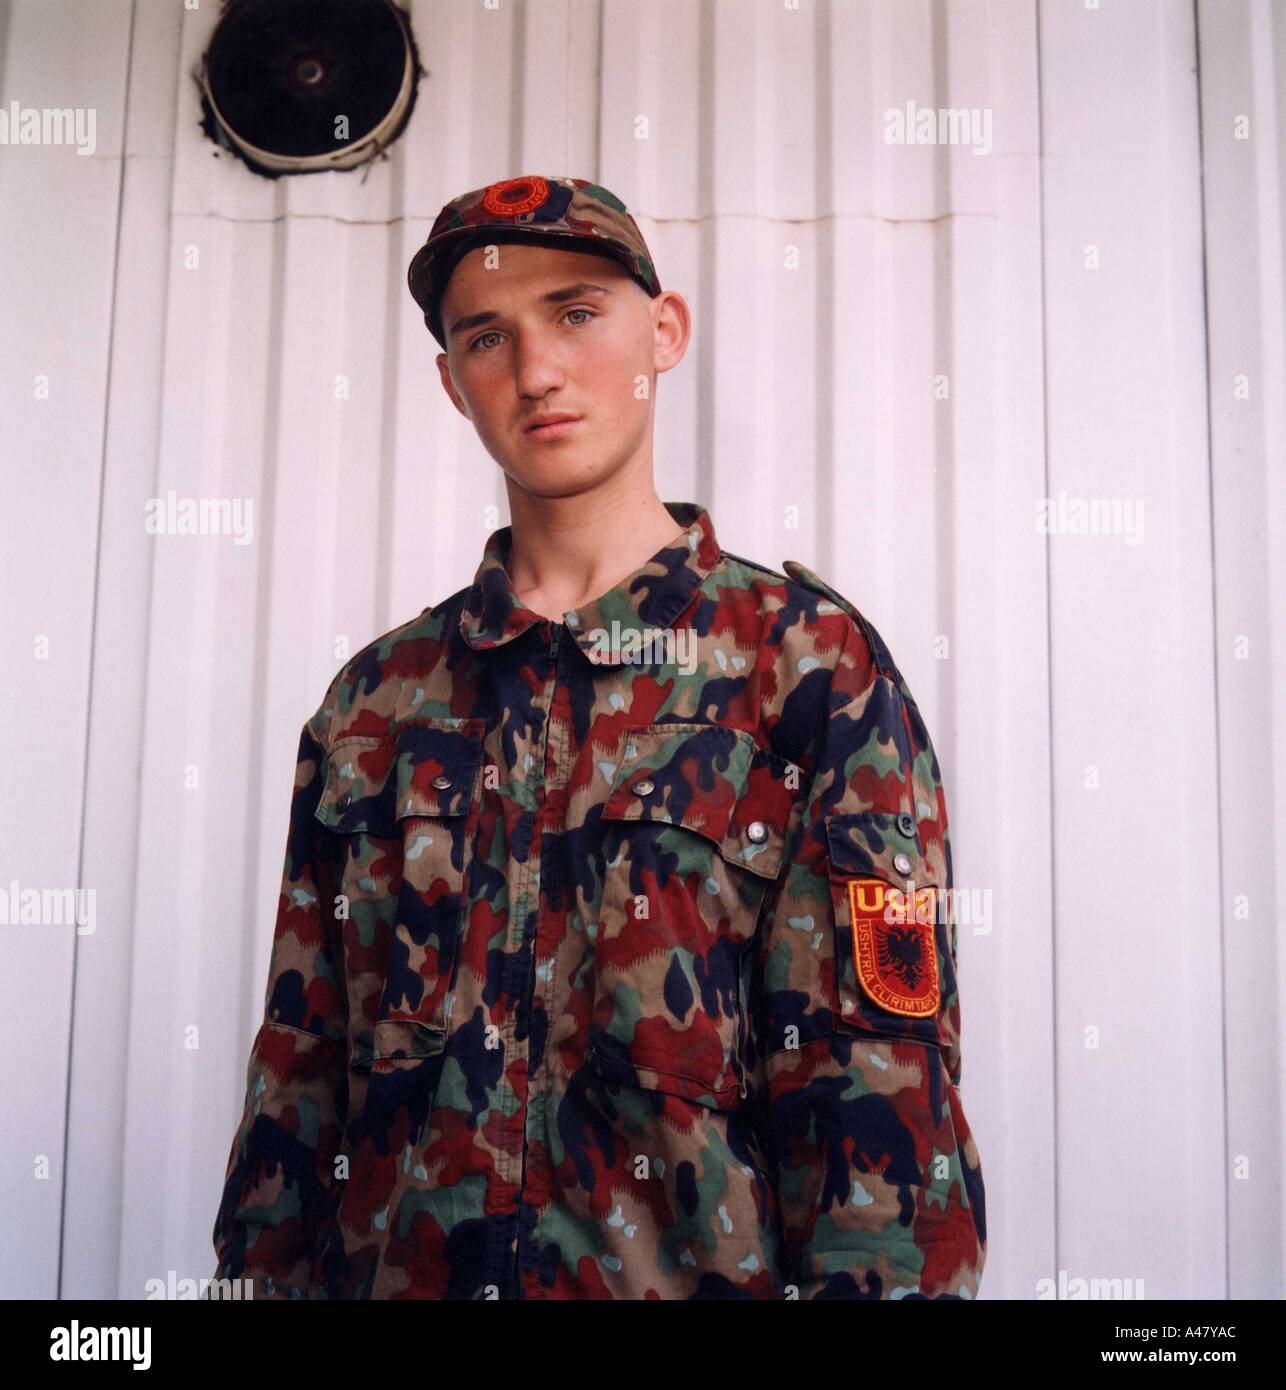 A young Kosovan Liberation Army (UCK) recruit in his new uniform in Tirana, Albania Stock Photo